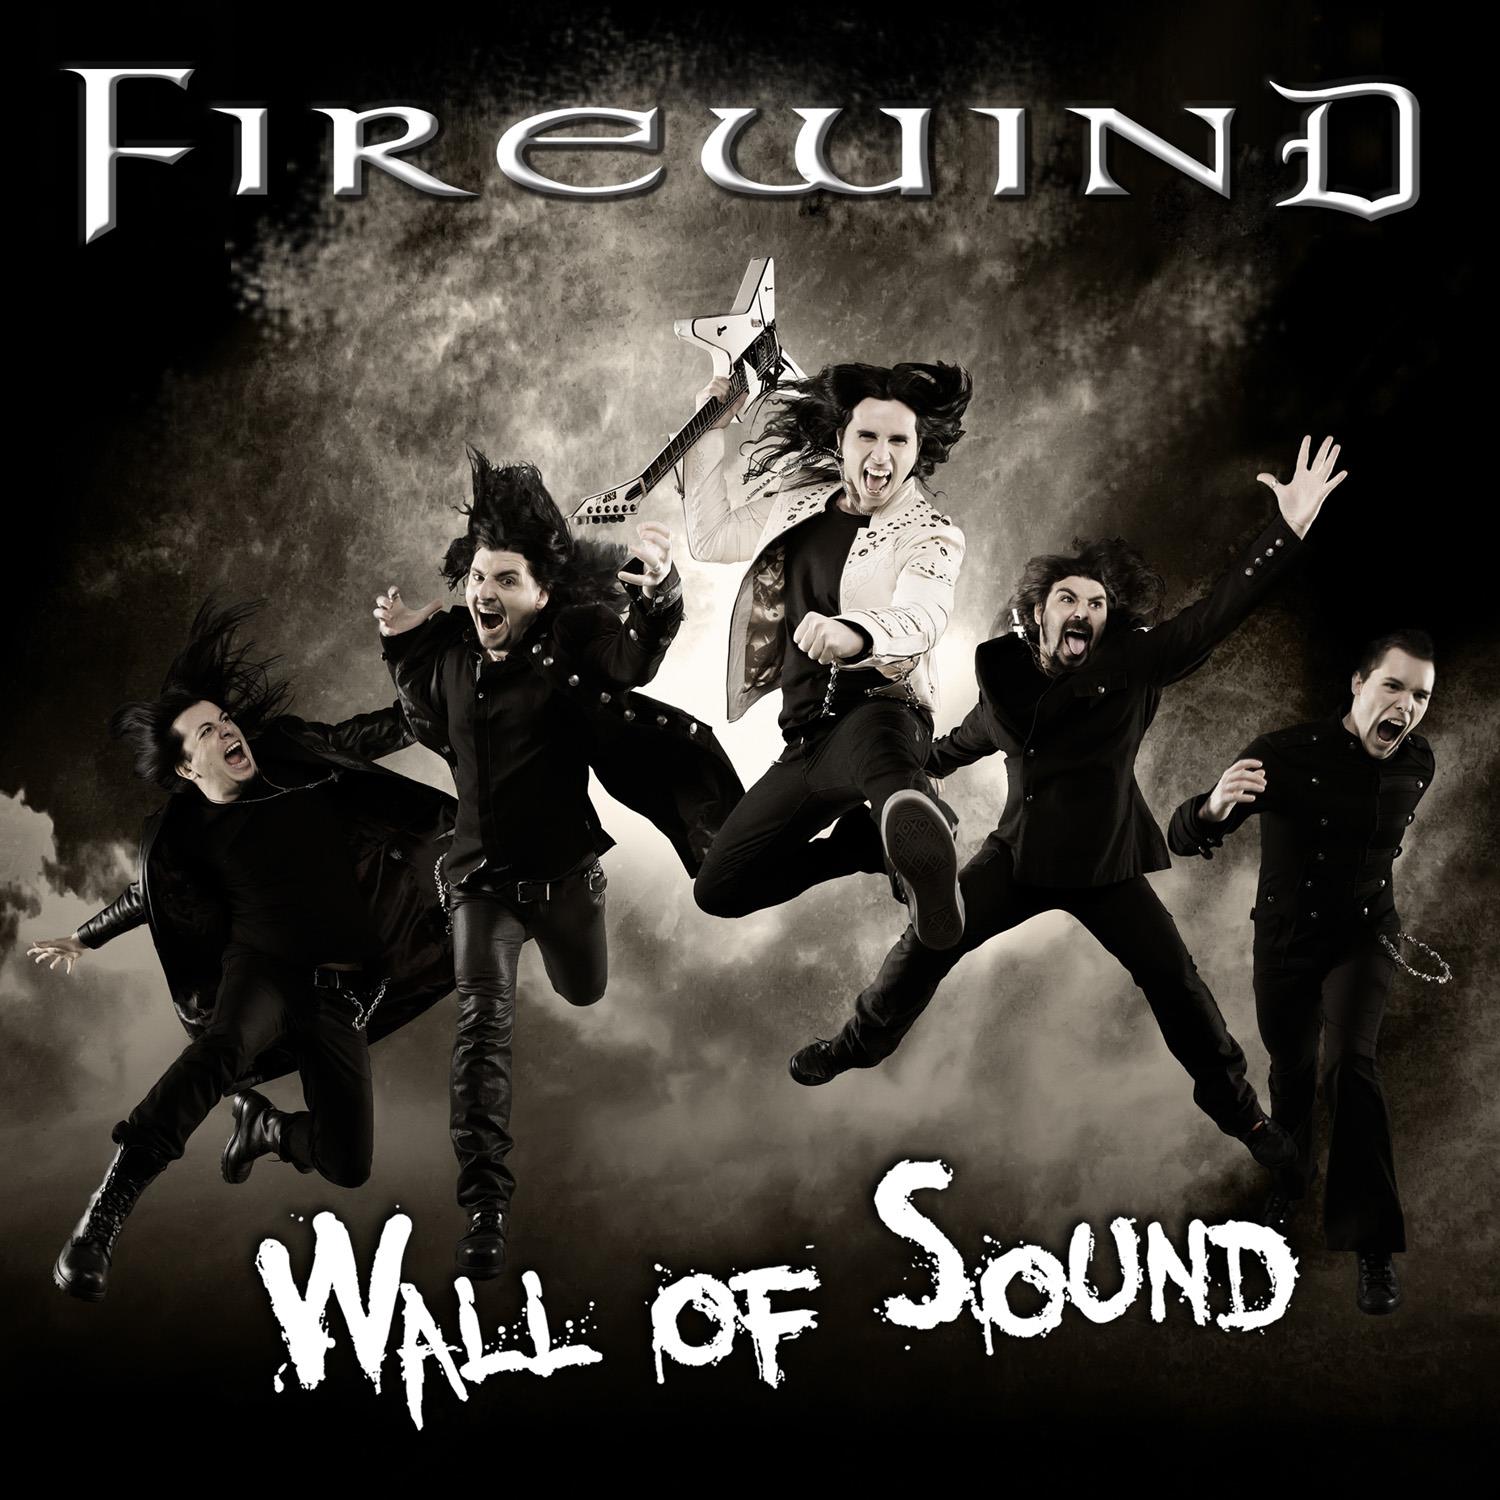 Firewind High Quality Background on Wallpapers Vista